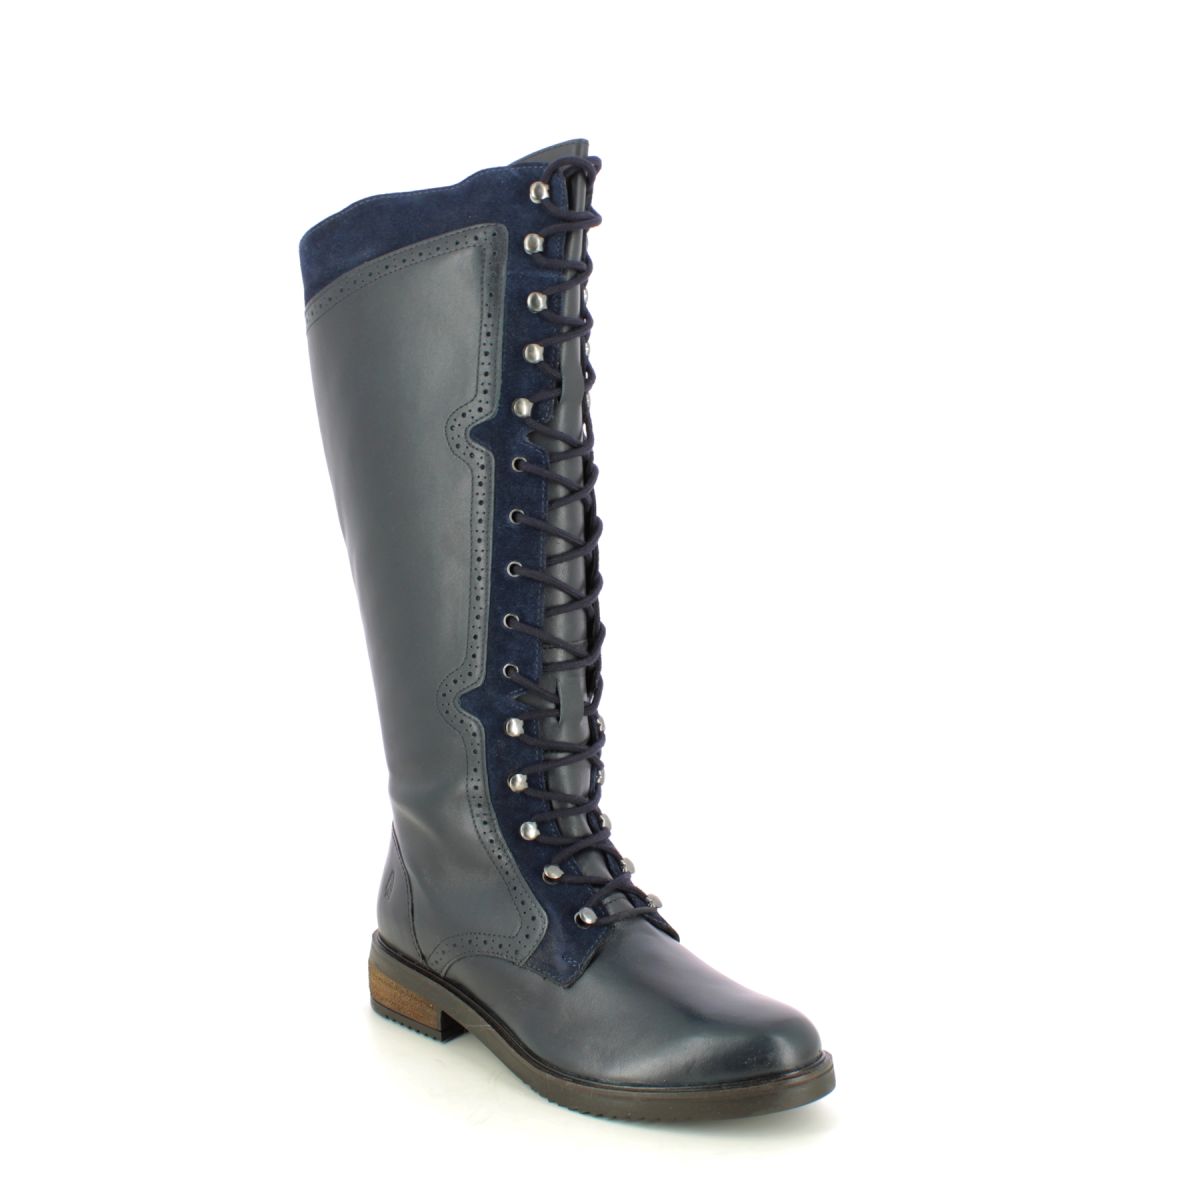 Hush Puppies Rudy Boot Lace Navy leather Womens knee-high boots 29203-66508 in a Plain Leather in Size 7